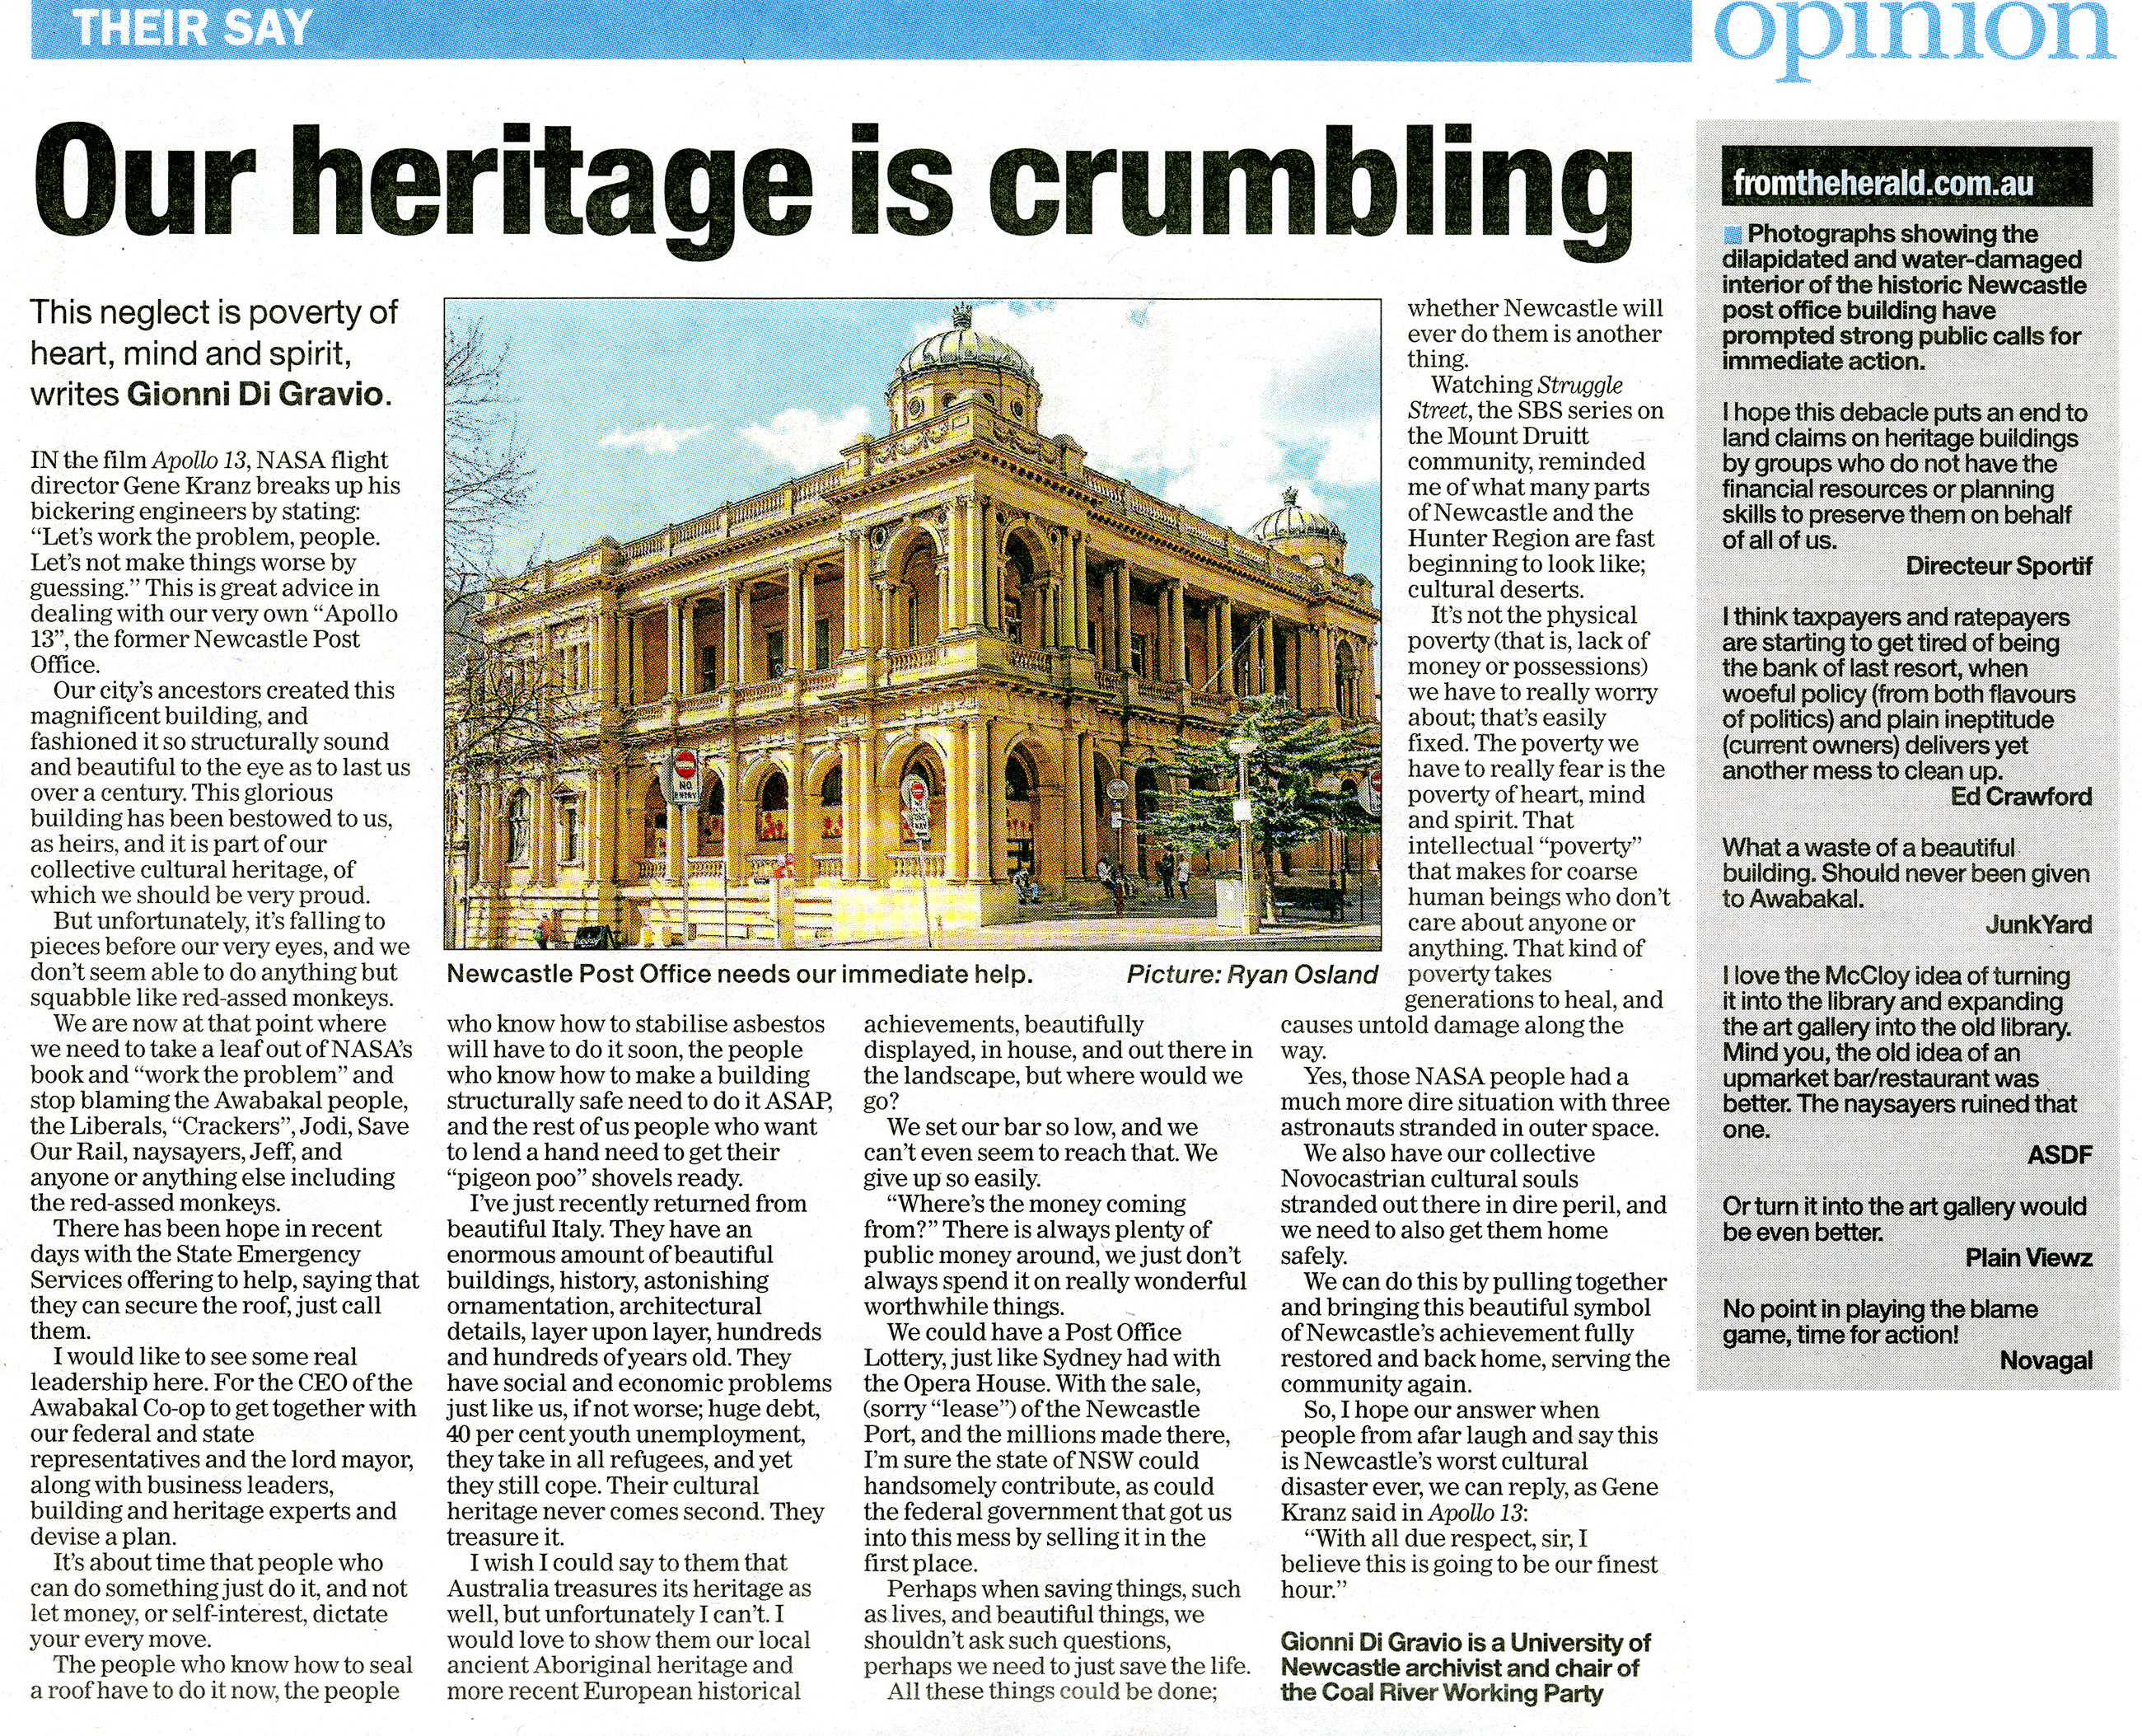 Opinion: Our Heritage Is Crumbling by Gionni Di Gravio, Newcastle Herald, 20th May 2015 p.11